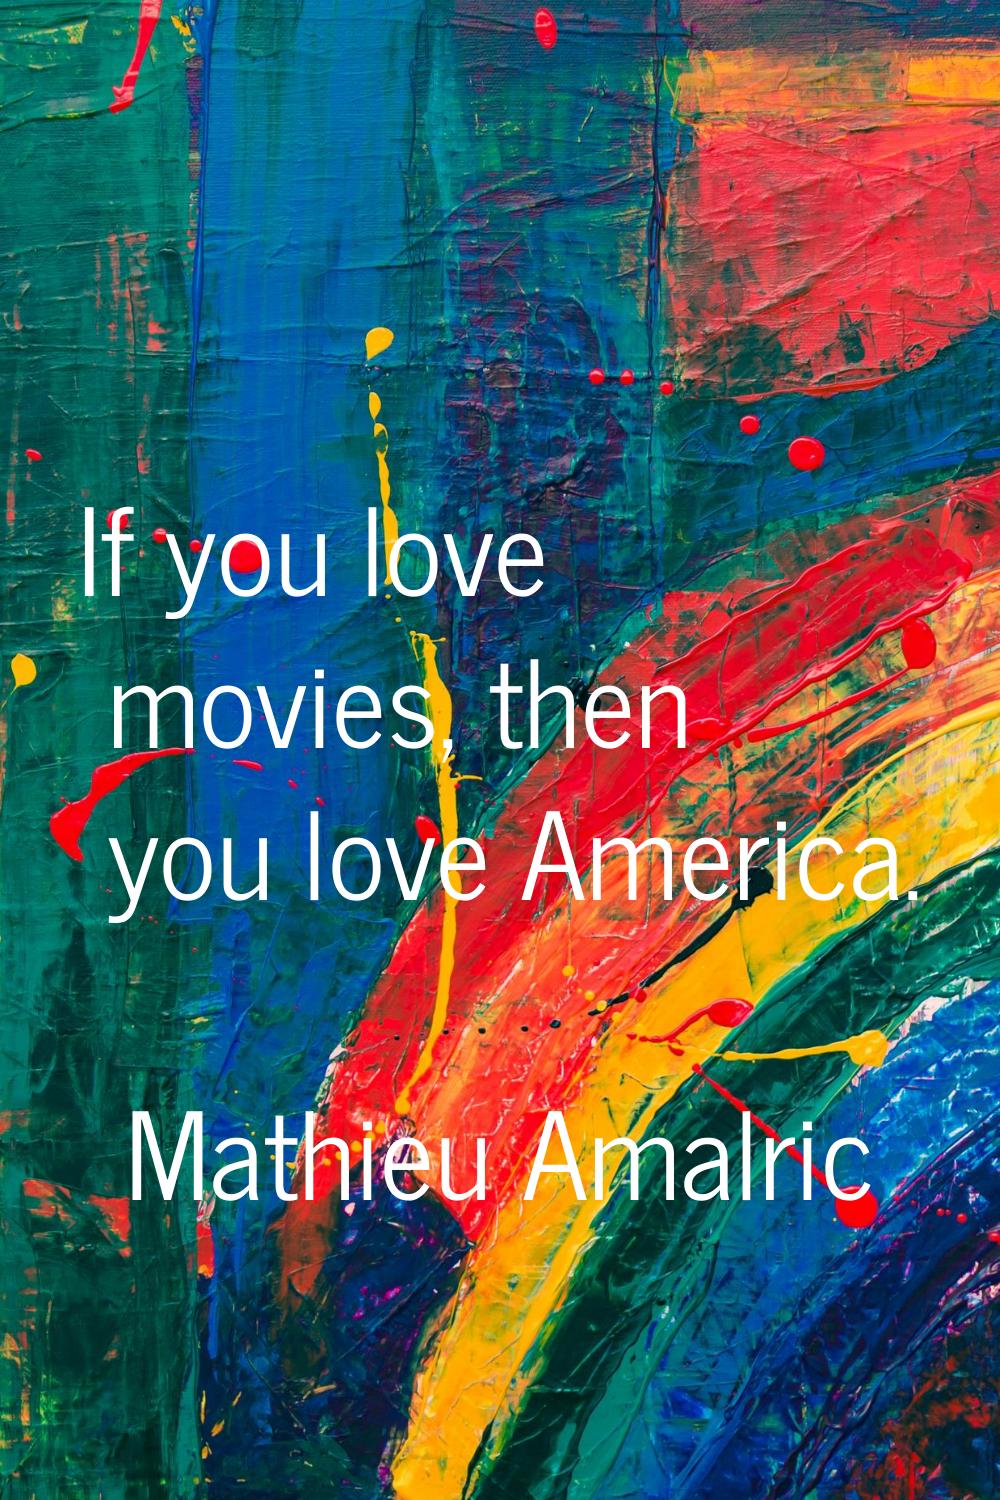 If you love movies, then you love America.